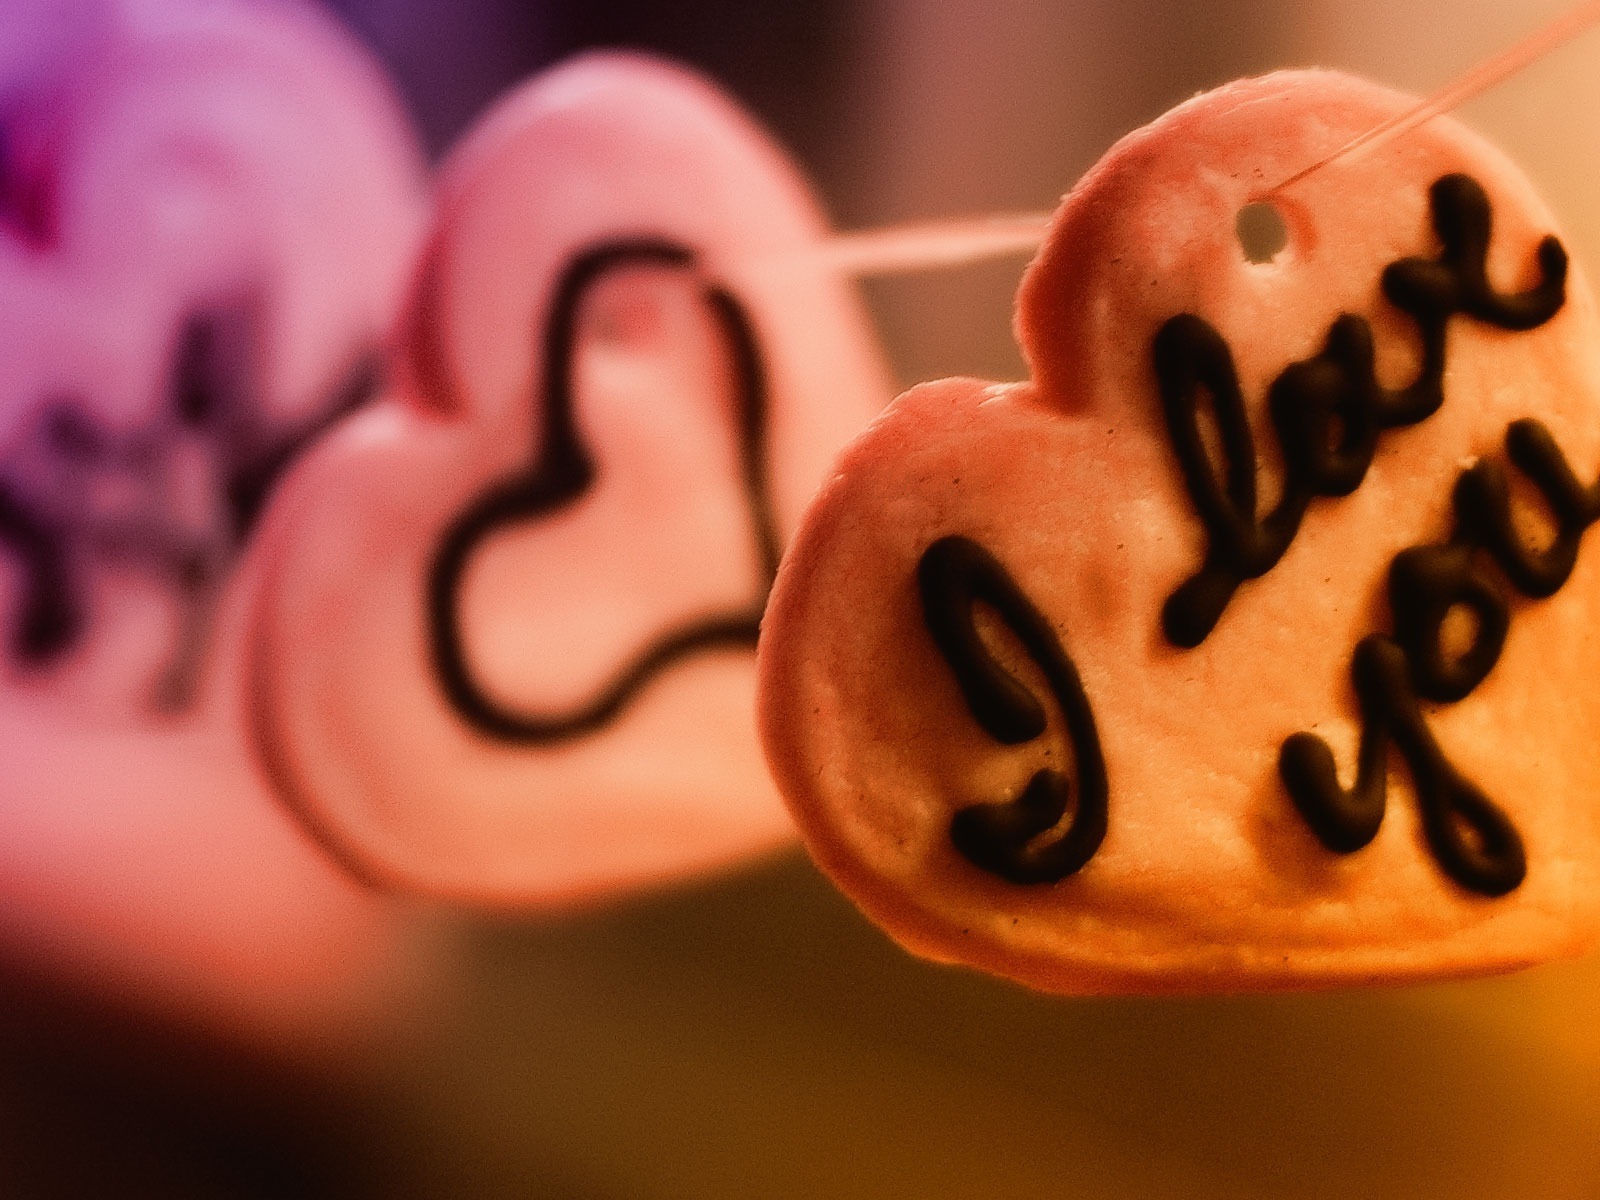 Warm and romantic Valentine's Day HD wallpapers #4 - 1600x1200